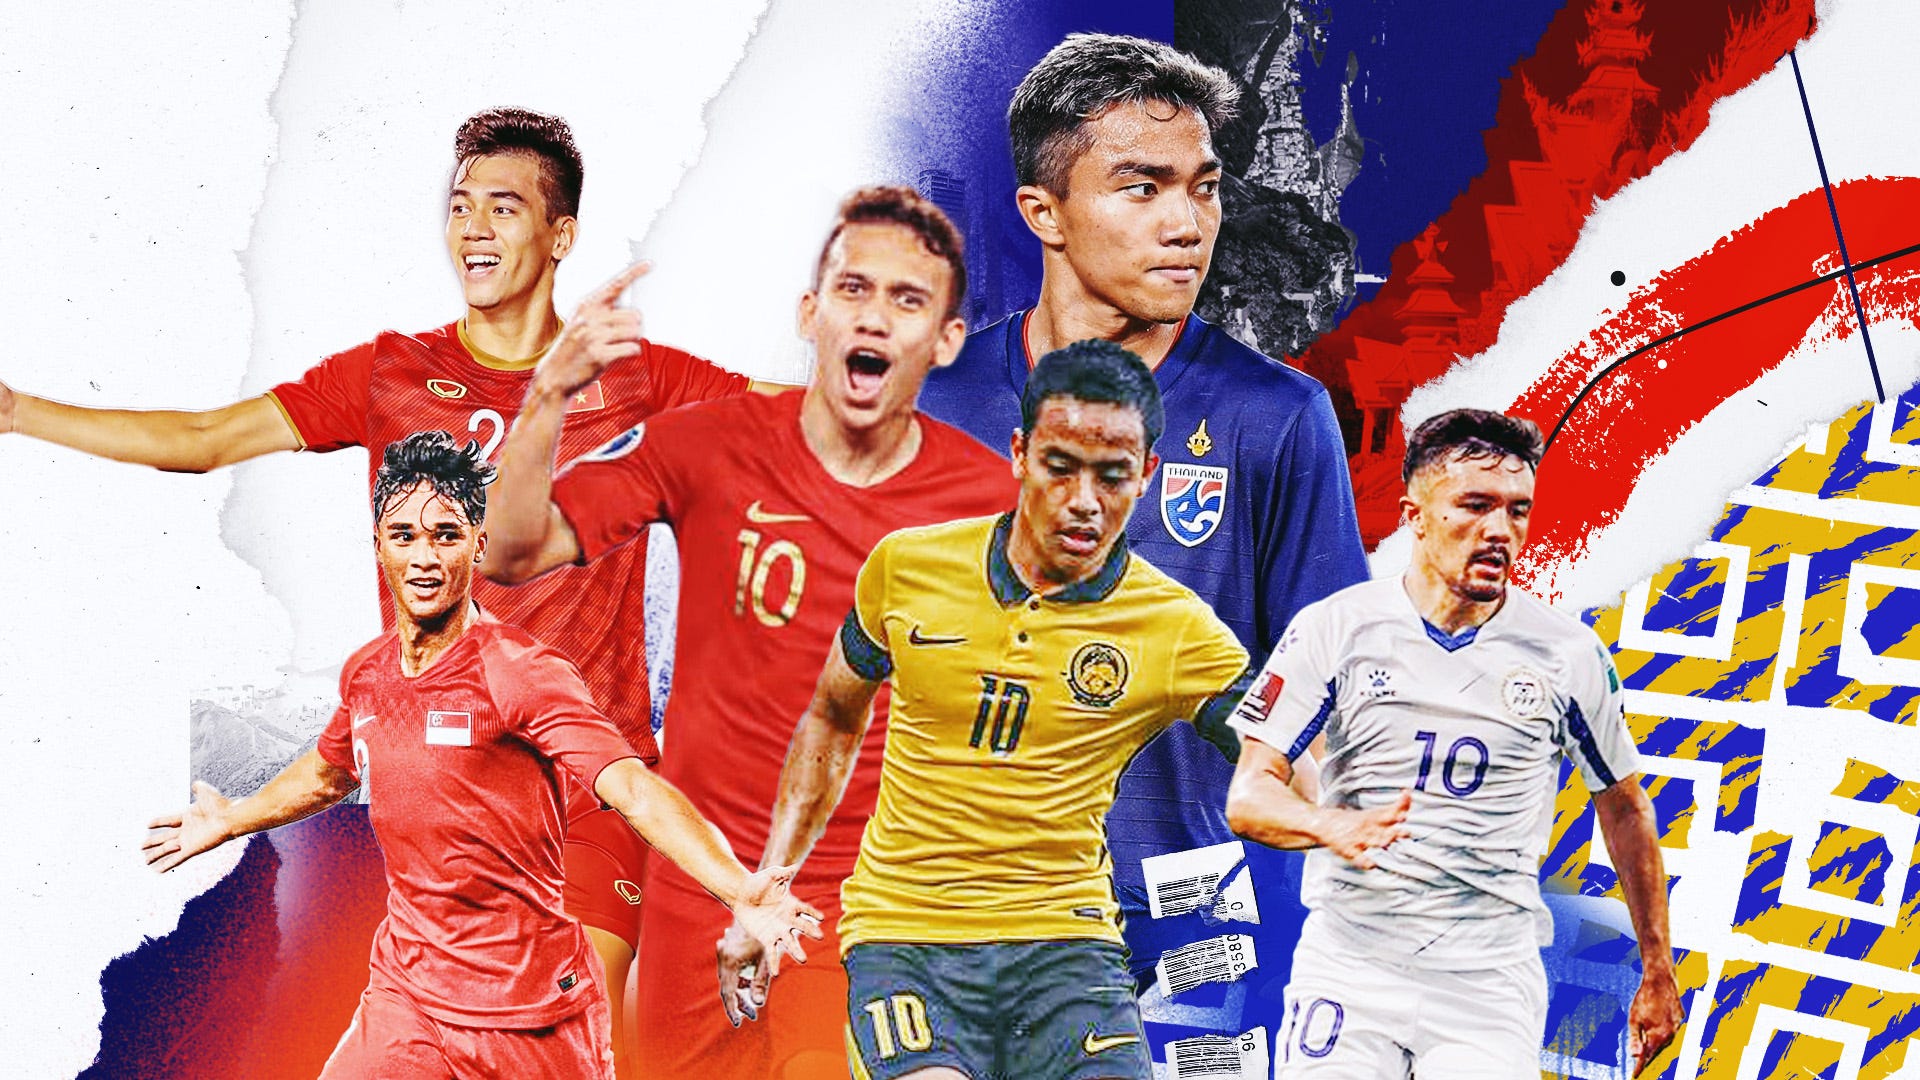 AFF Suzuki Cup 2021: Fixtures, results, tables and top scorers | Goal.com Singapore